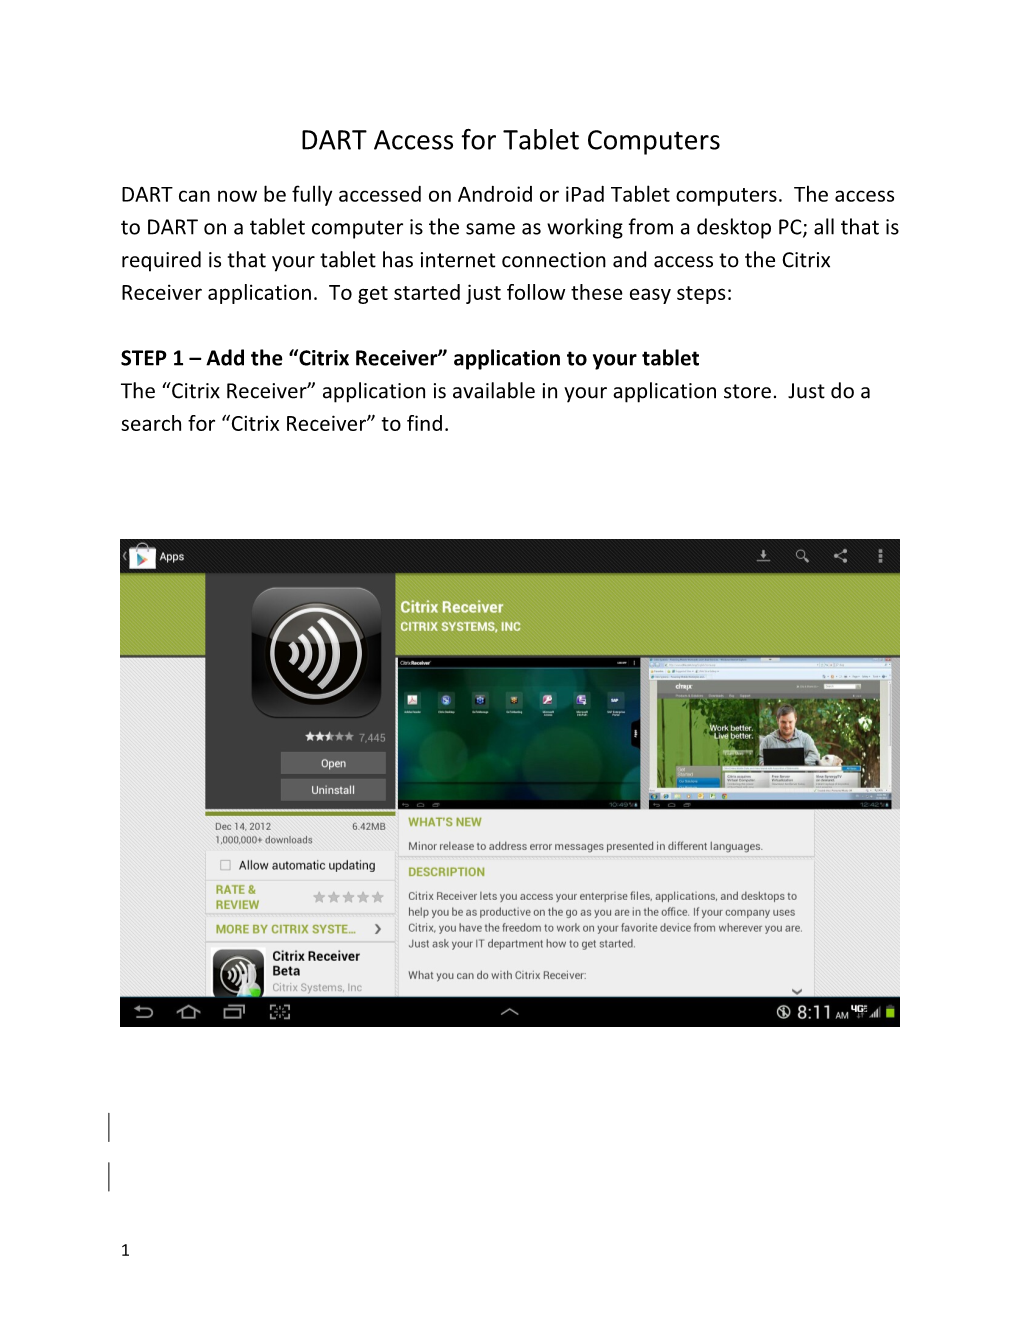 STEP 1 Add the Citrix Receiver Application to Your Tablet